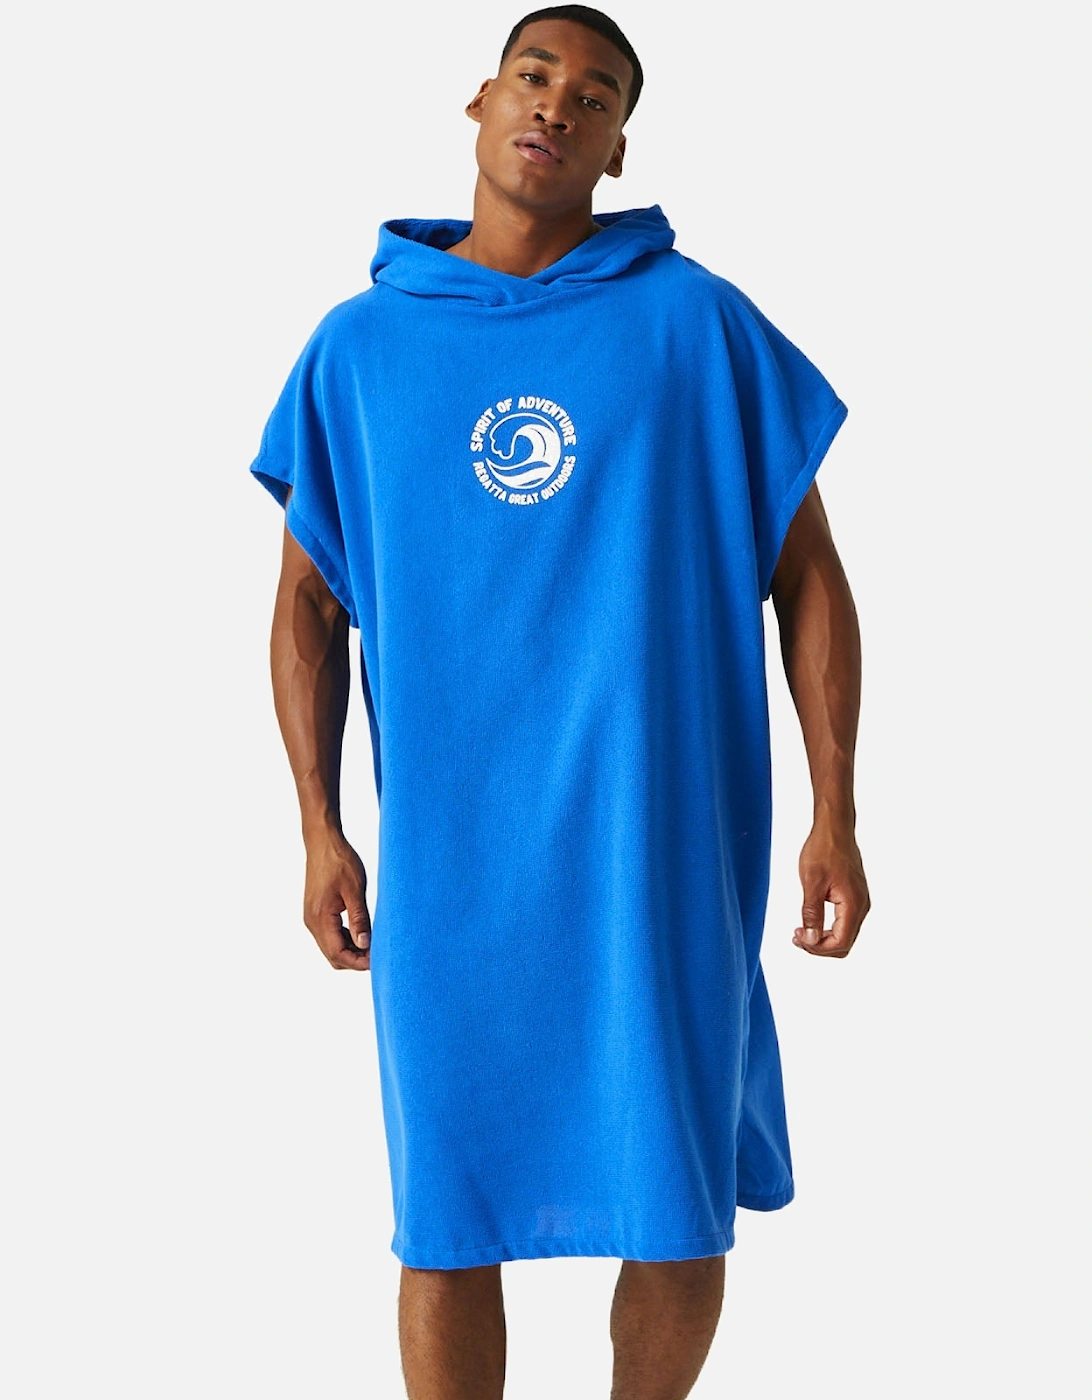 Adults Hooded Towel Poncho, 35 of 34